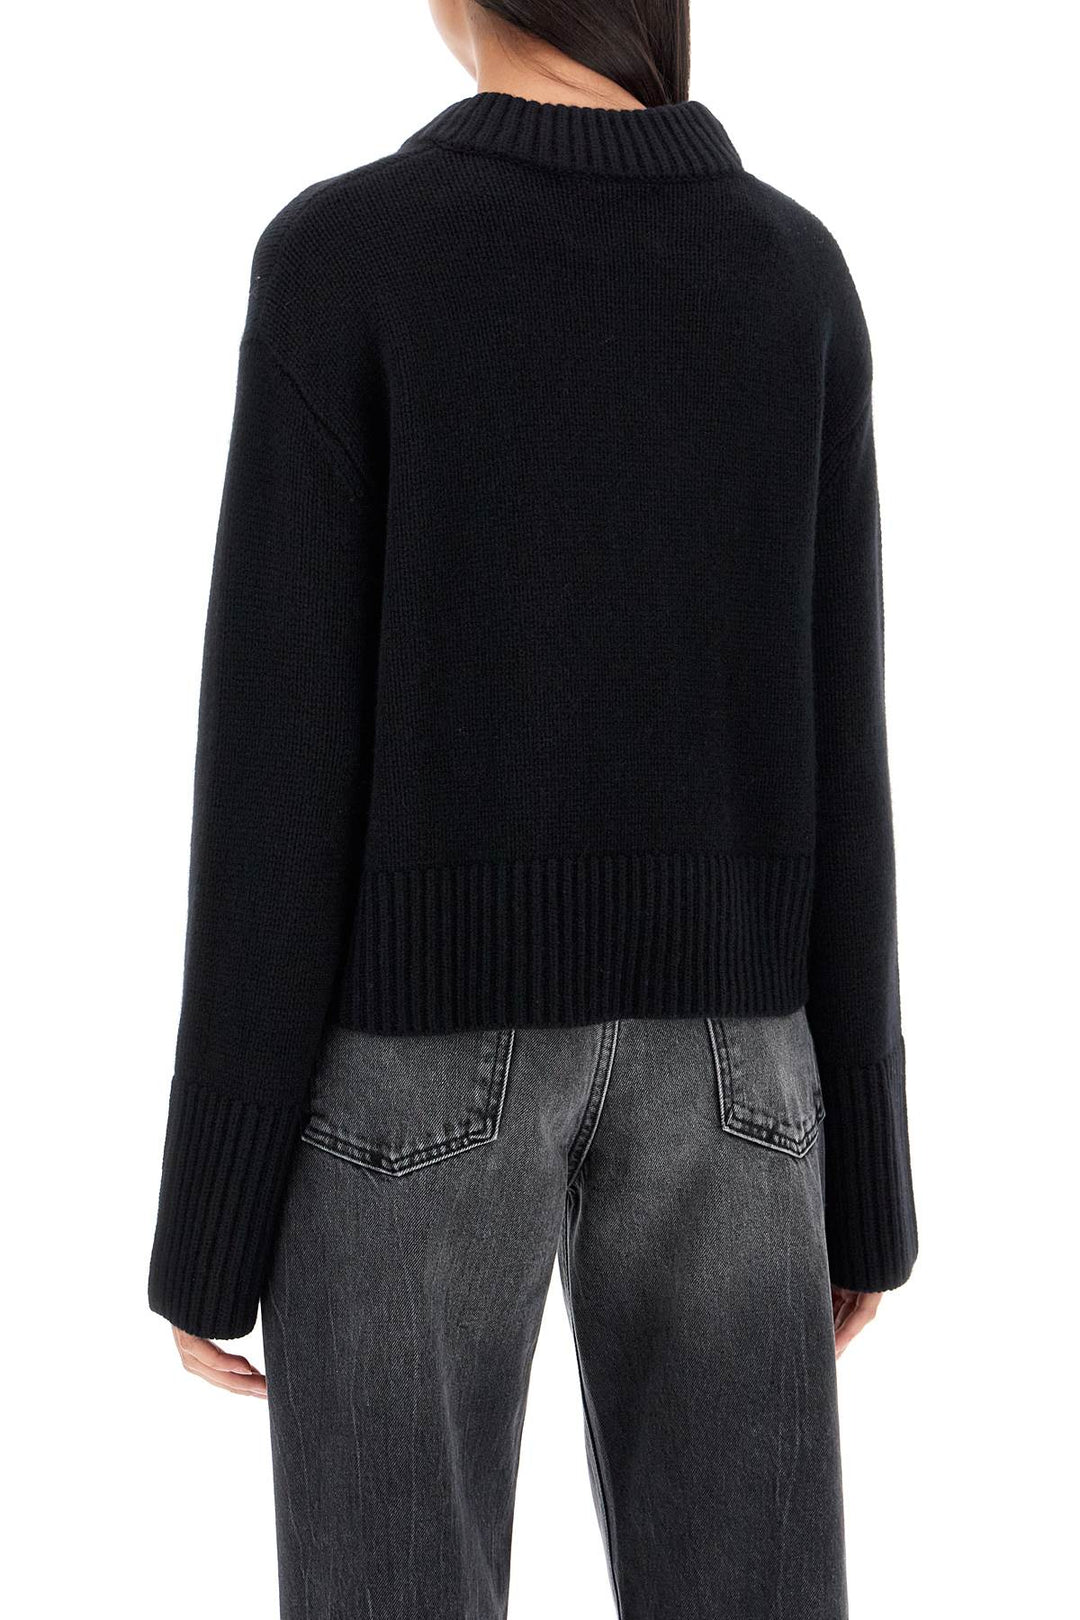 Lisa Yang Cashmere Sony Pullover Sweater   Black